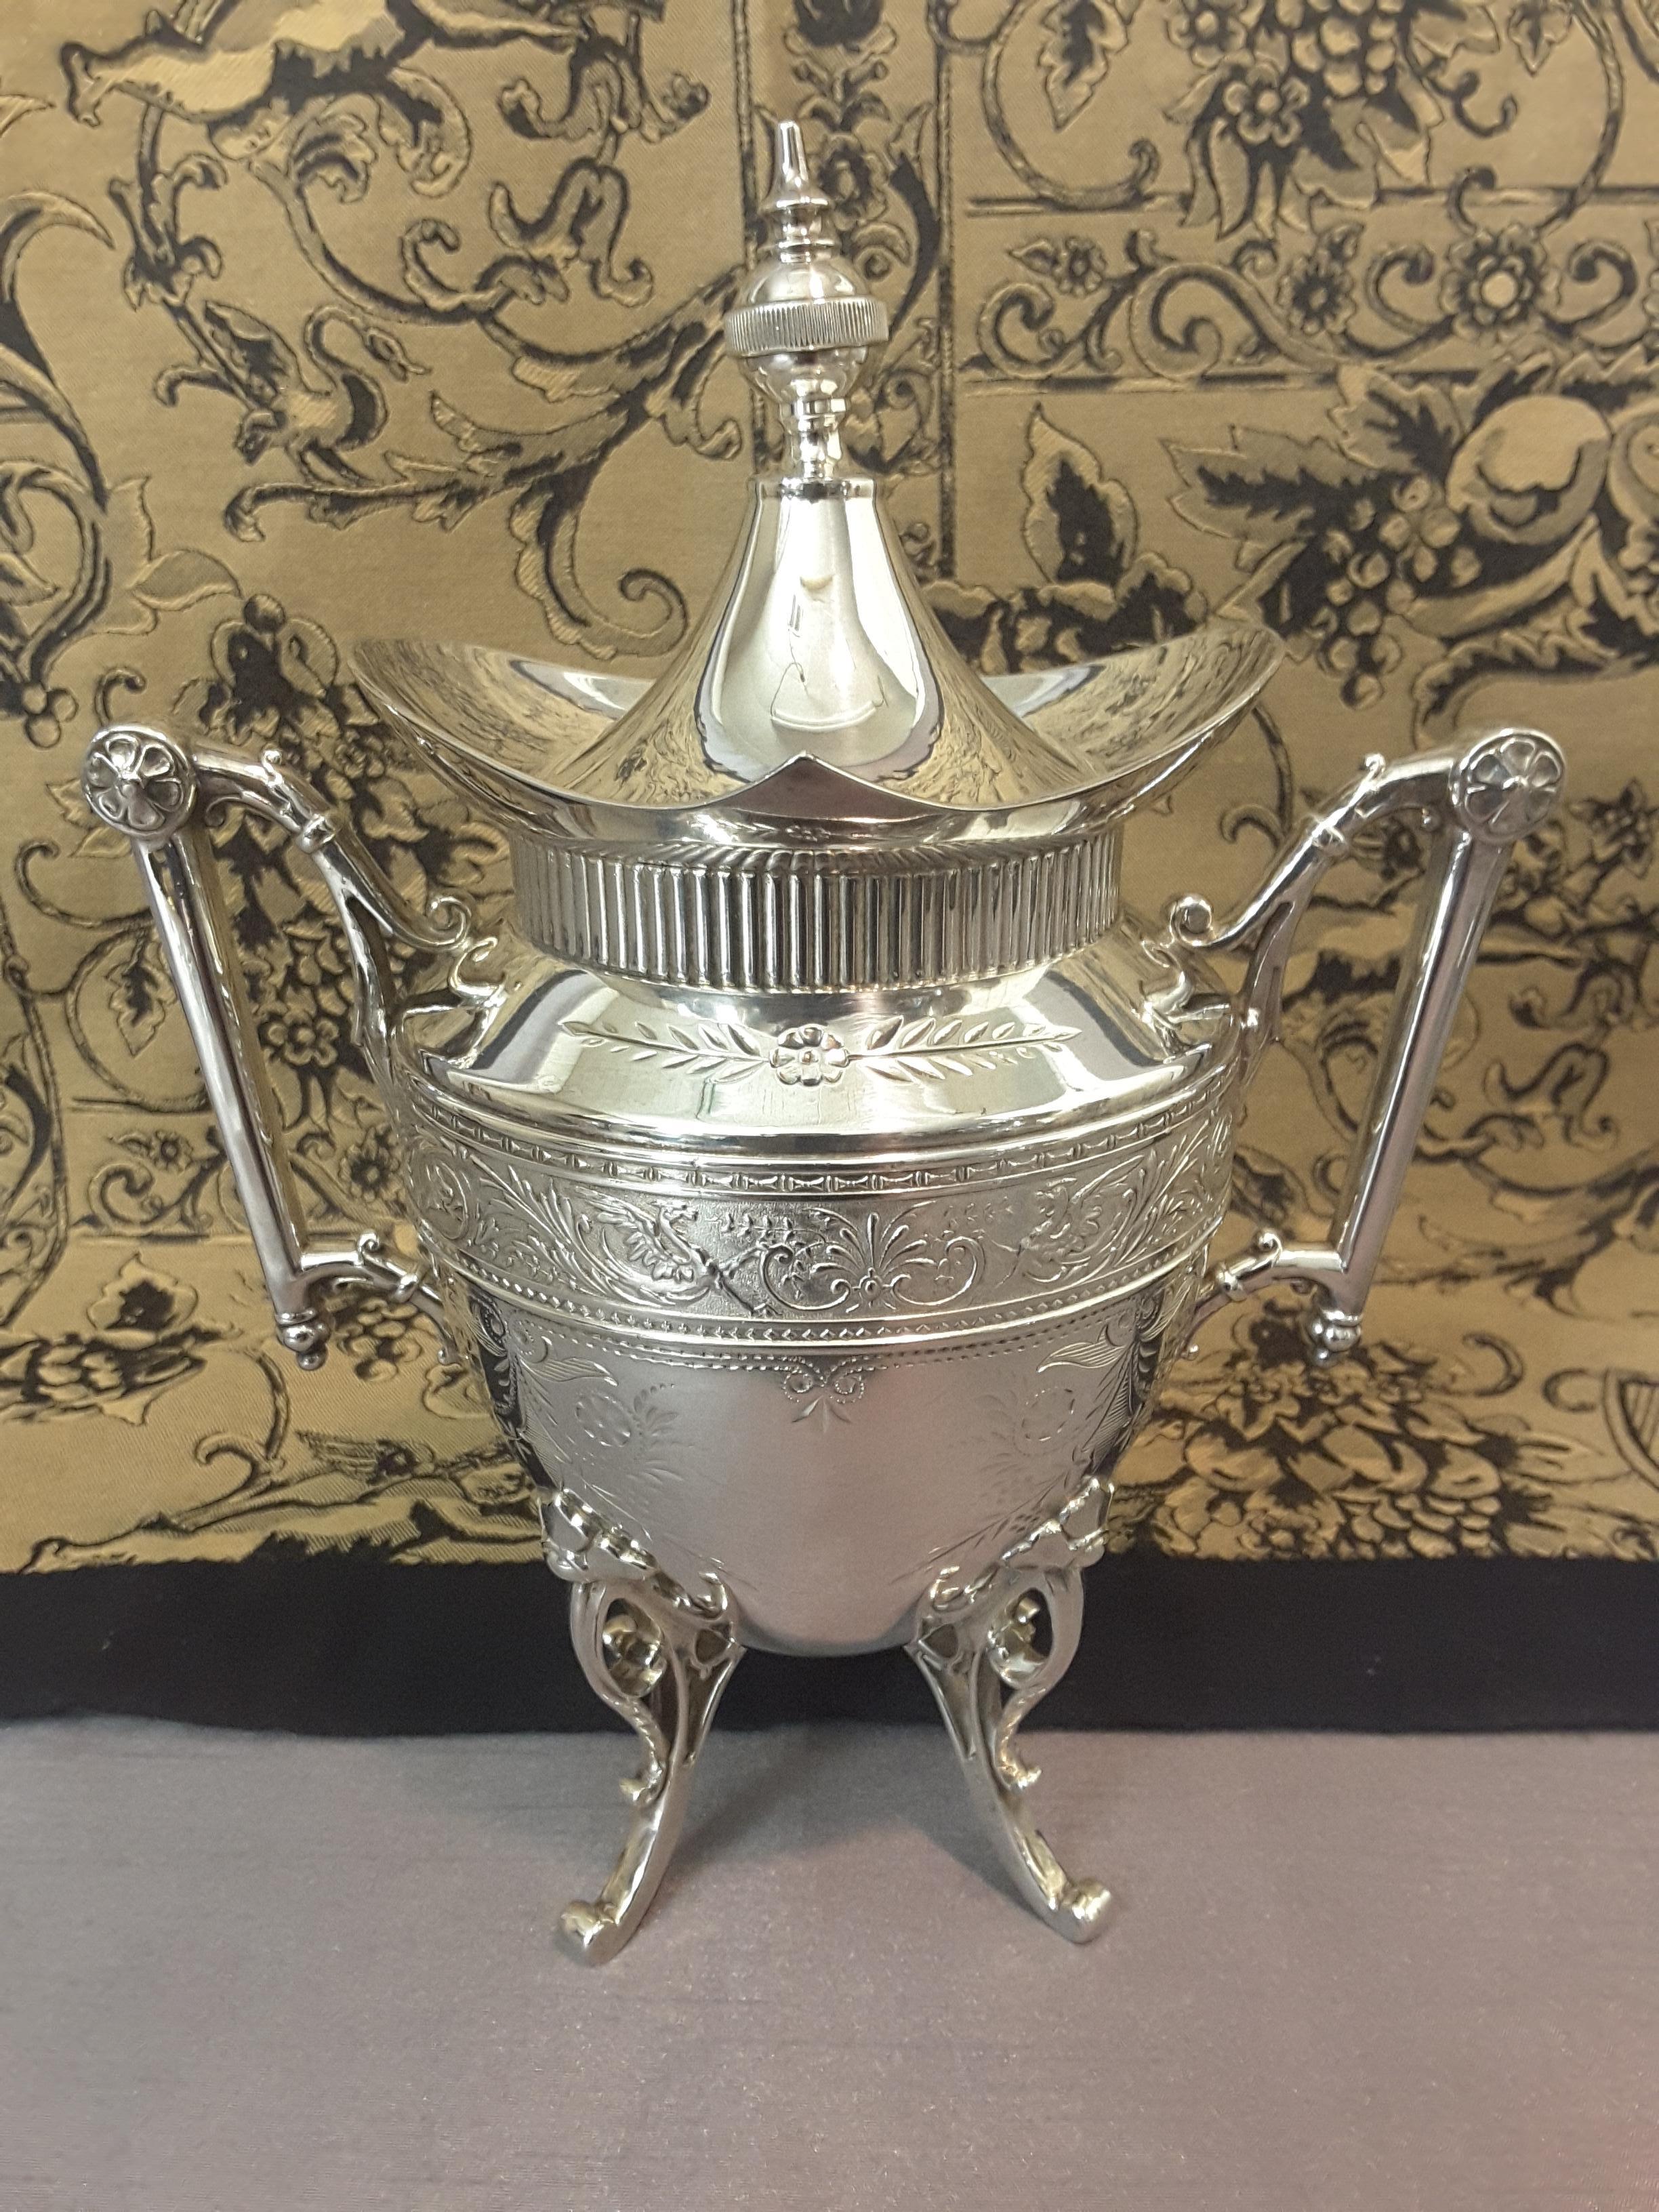 Exquisite Aesthetic Movement Silverplated Tea Service by Simpson, Hall & Miller For Sale 4